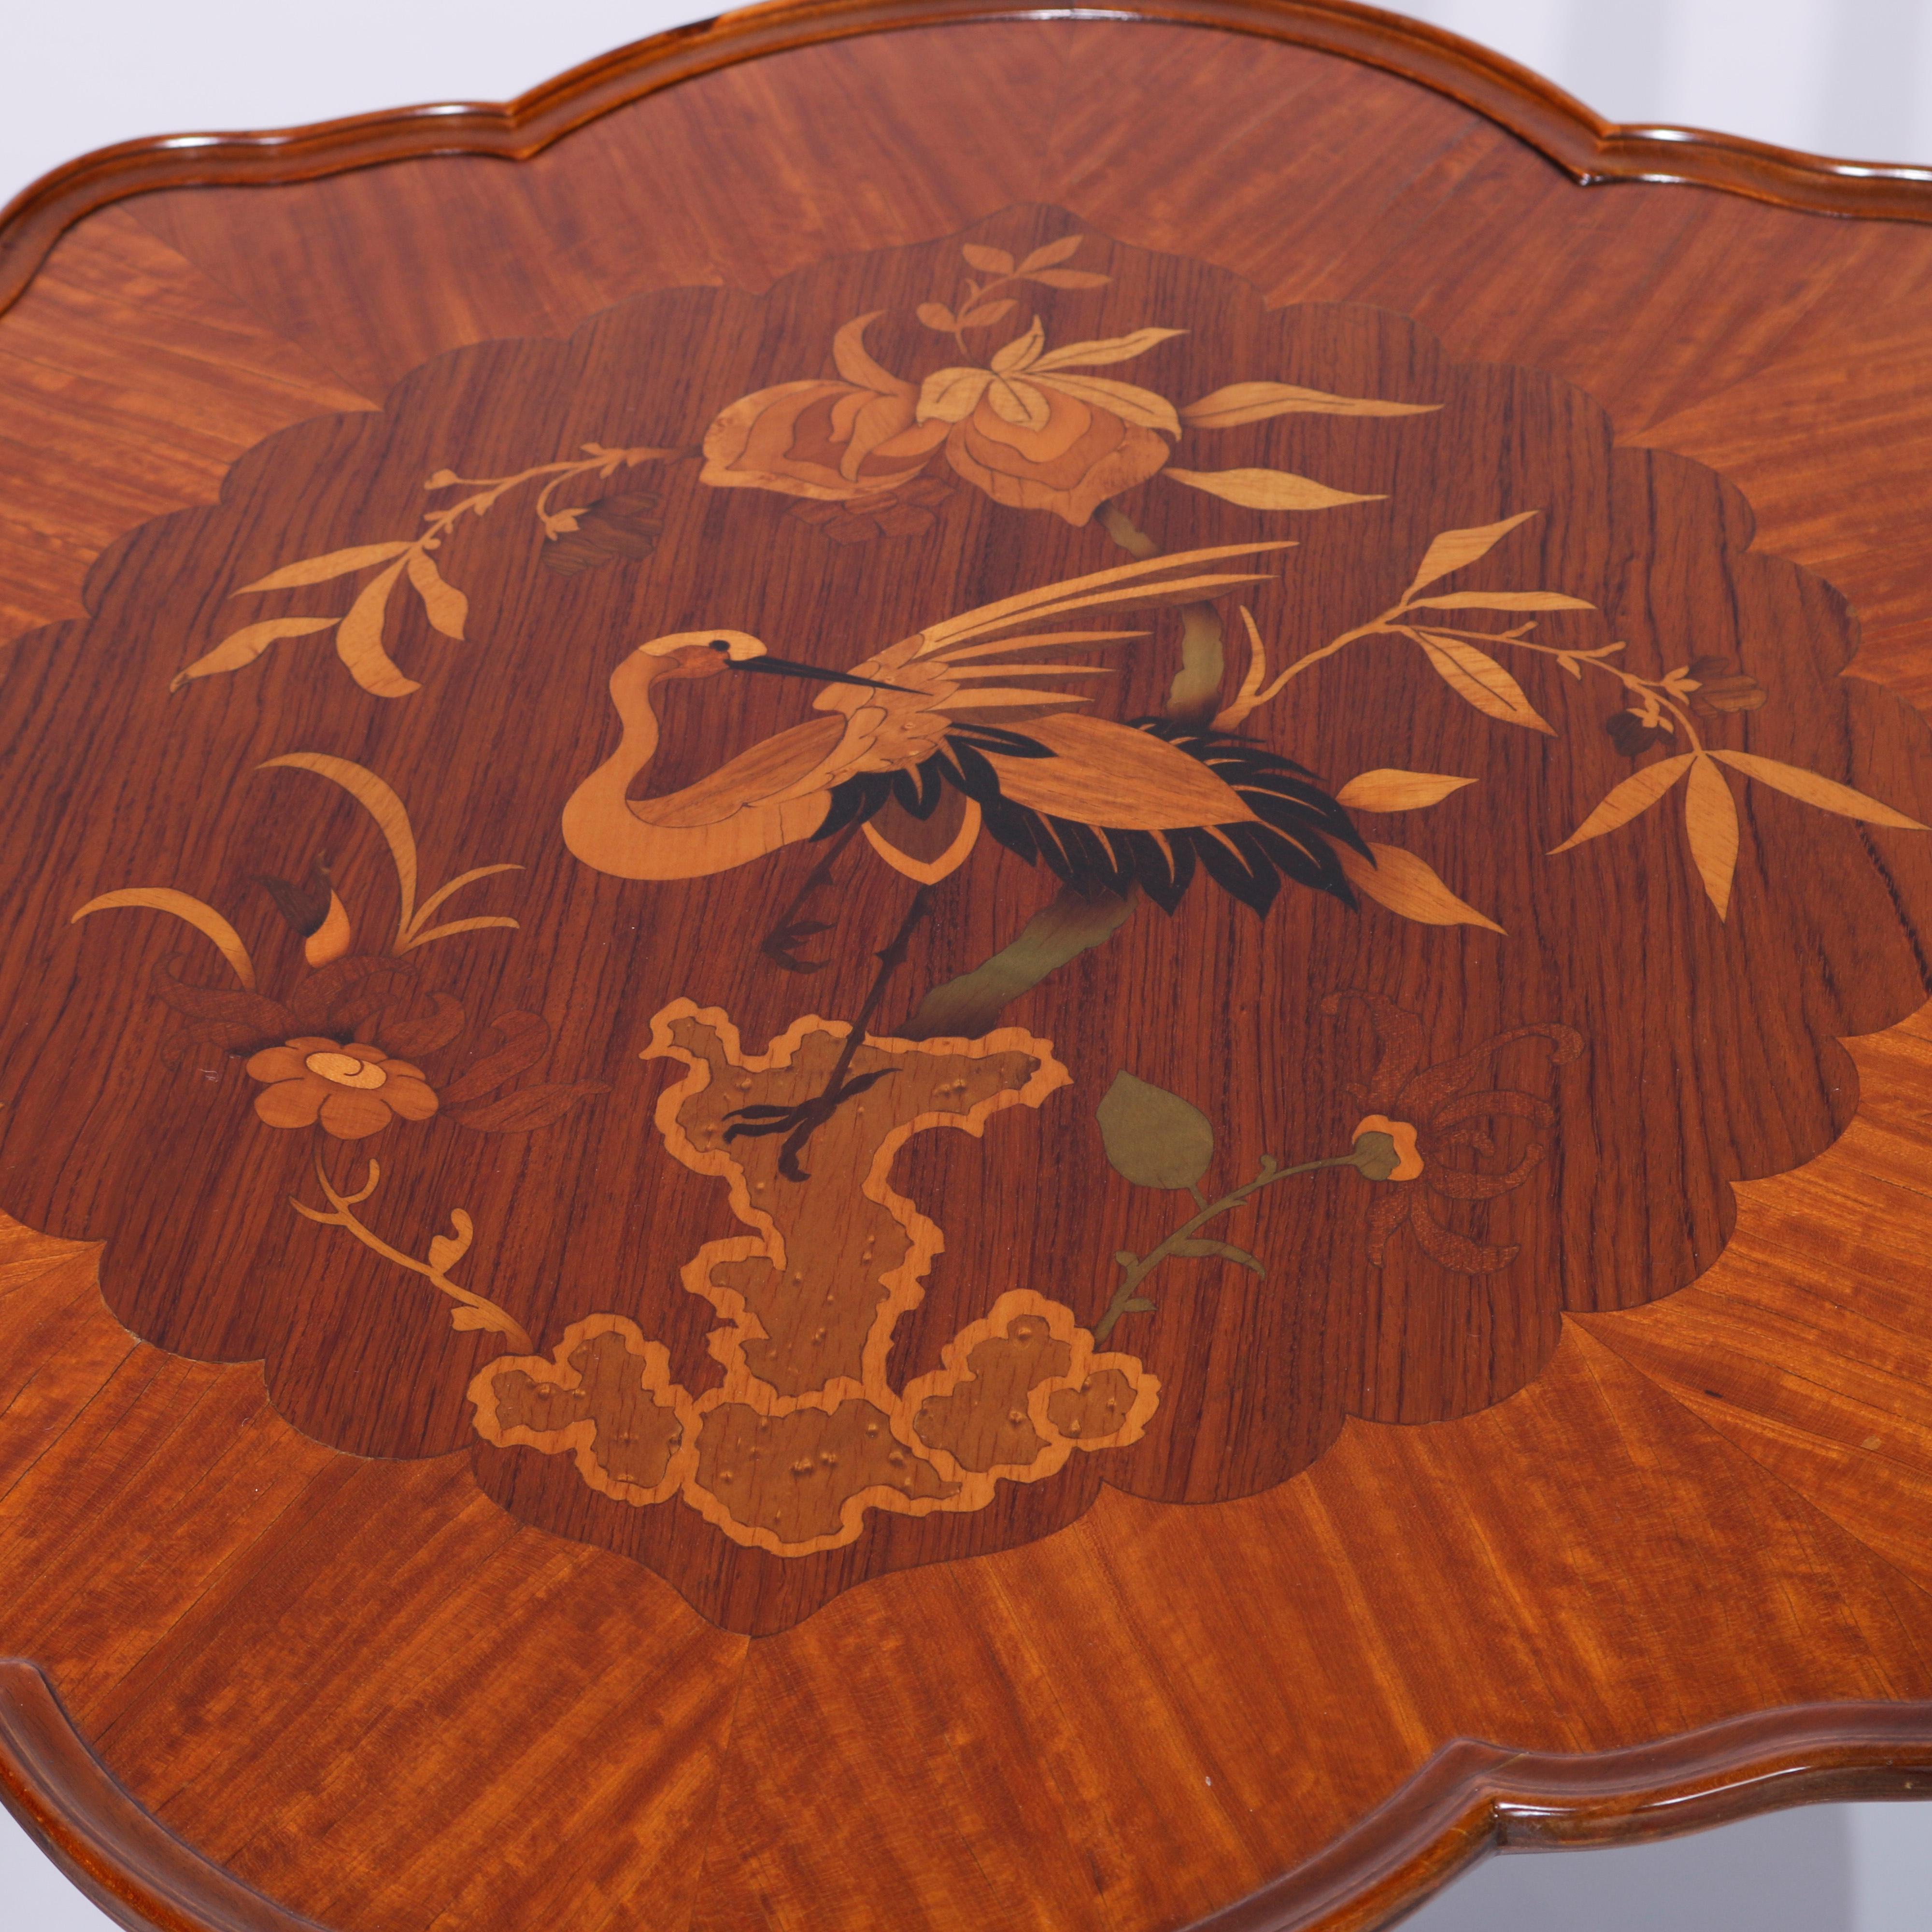 European Antique Heron Satinwood Marquetry Scalloped Triple Pedestal Side Tables, c1930 For Sale